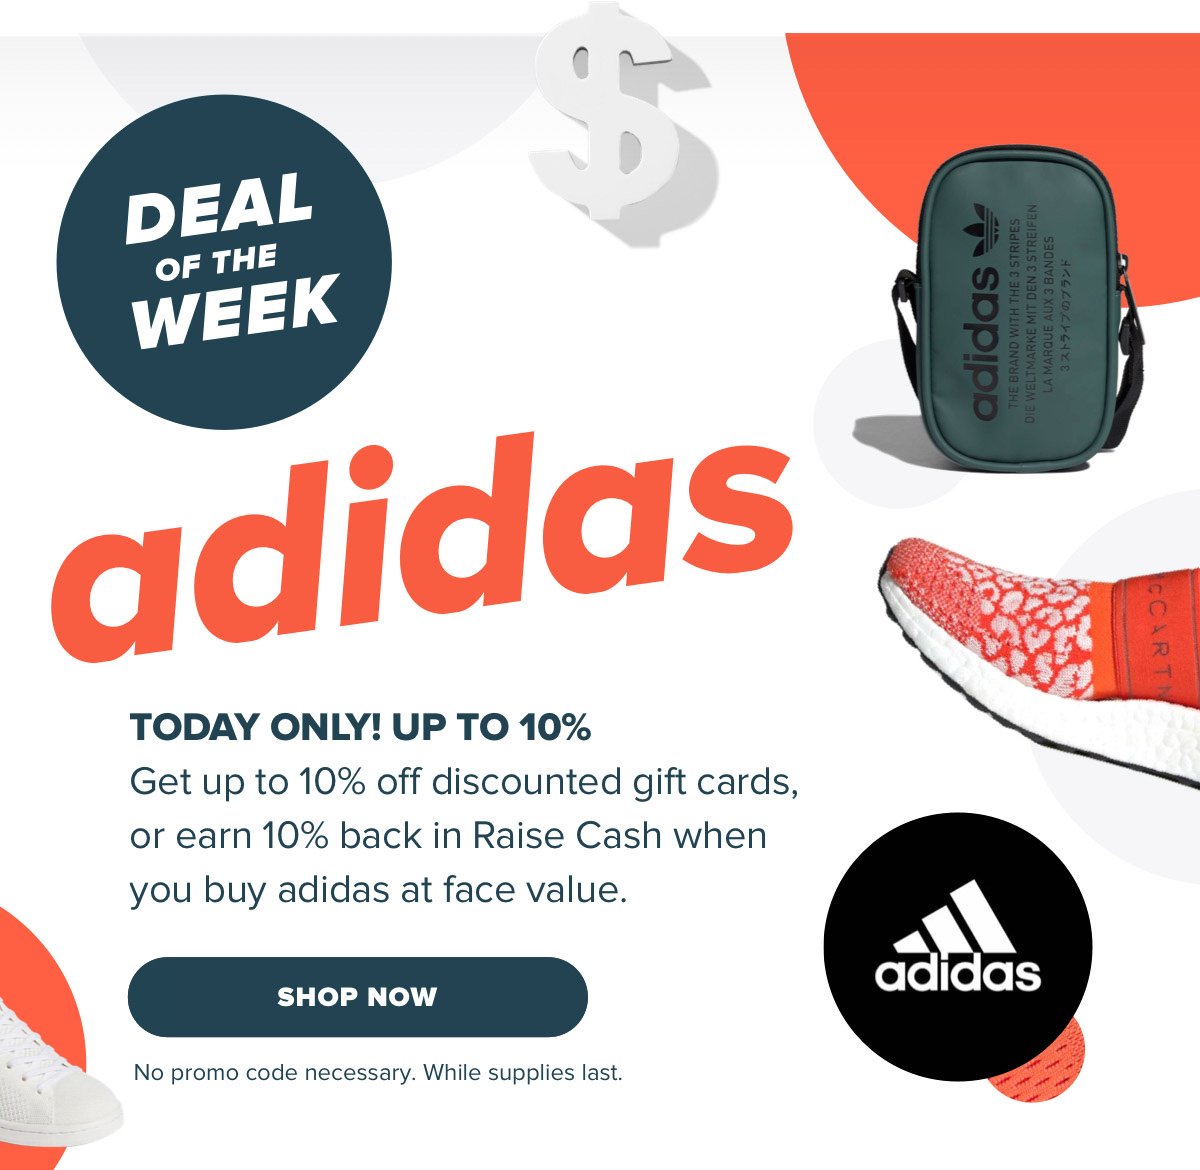 Deal of the Week! 10% off adidas | Milled